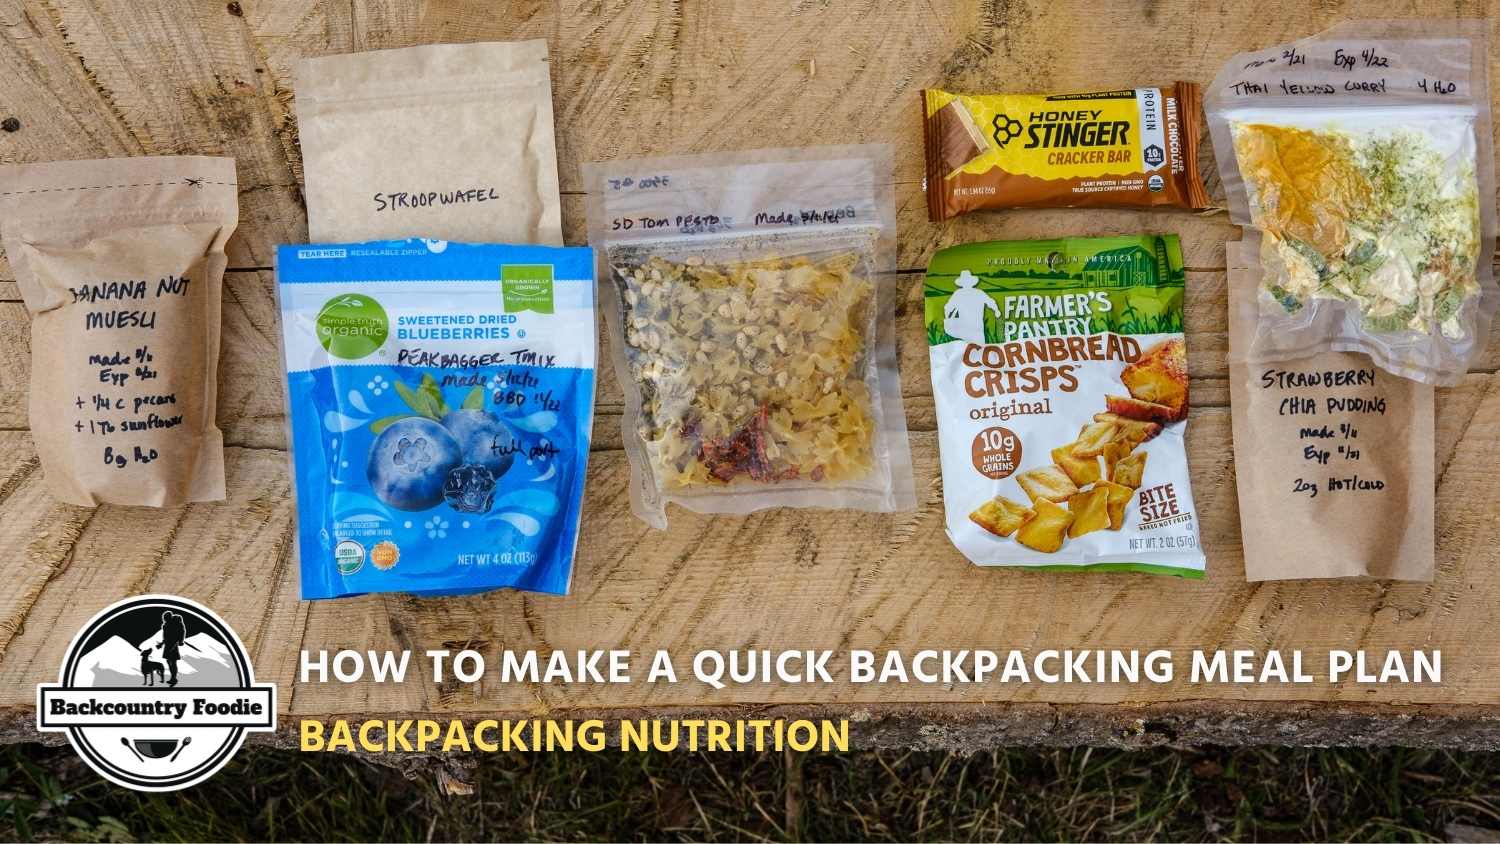 Backcountry Foodie Blog How to Make a Quick and Easy Backpacking Meal Plan Backpacking Nutrition